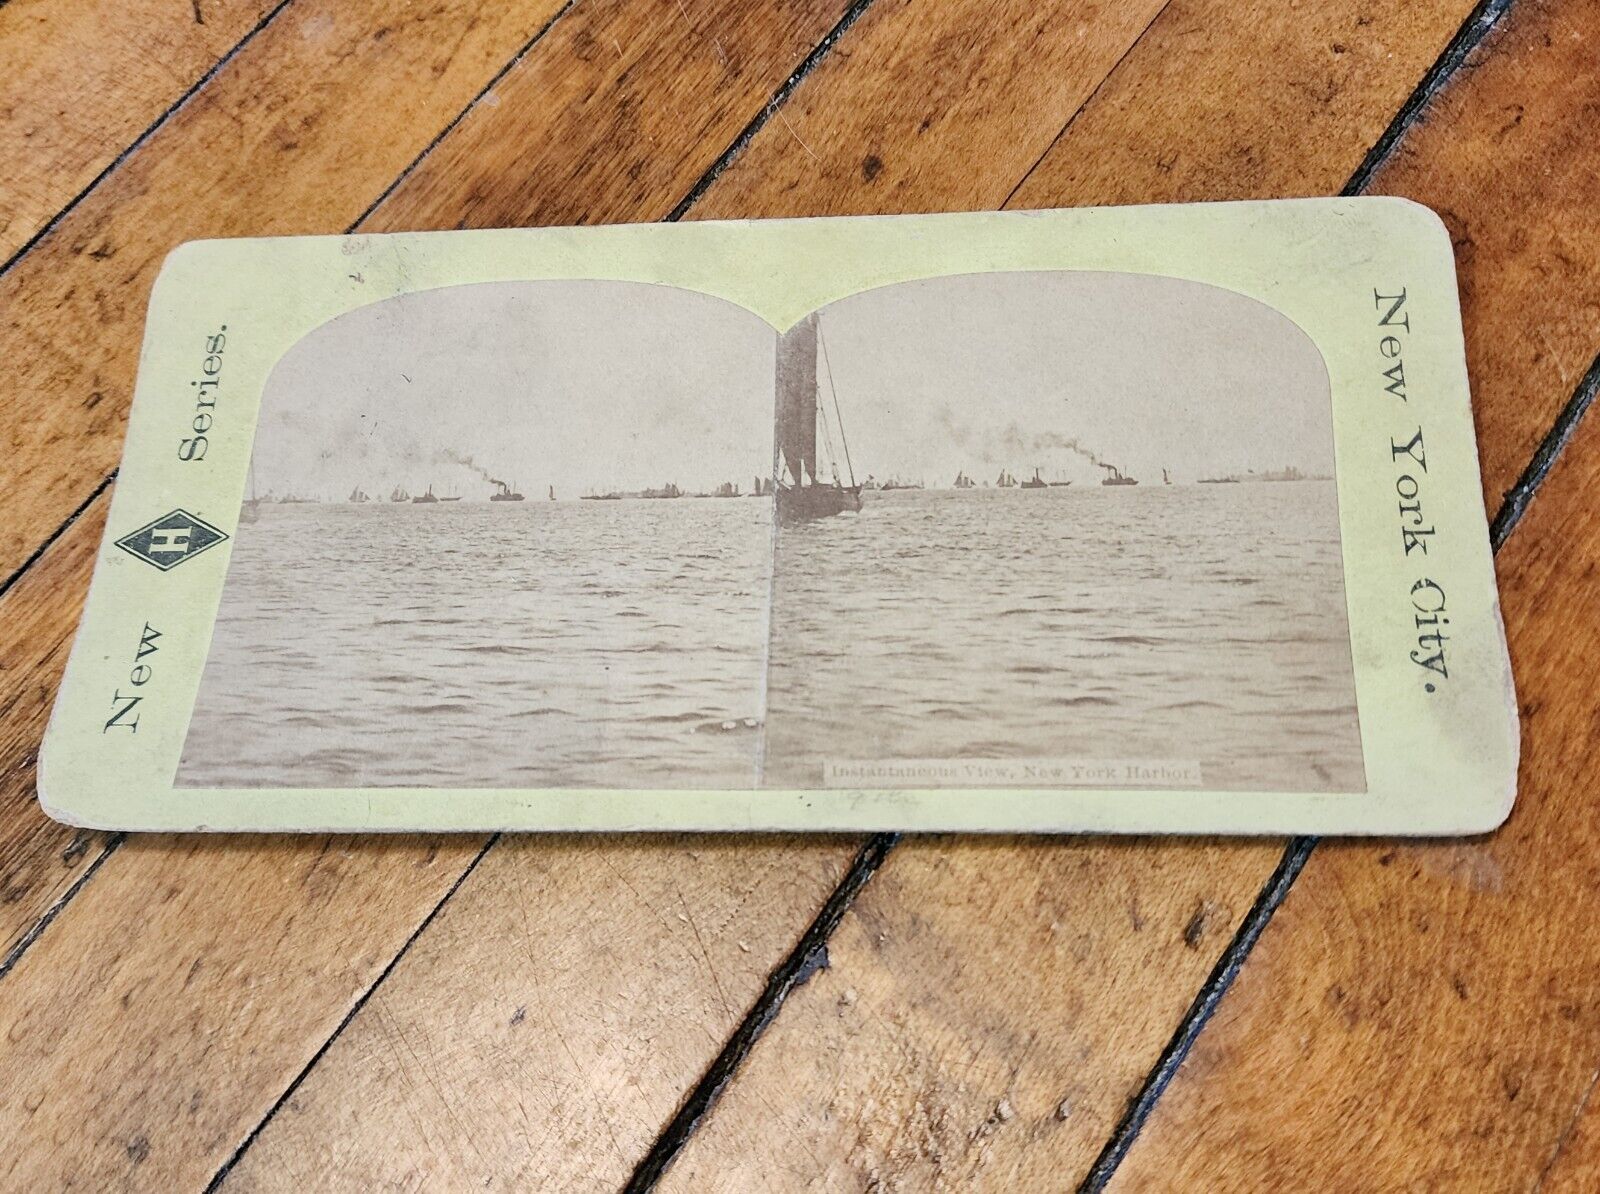 Antique Stereoscope Stereoview Card New York Harbor w Stea and Sailing Ships